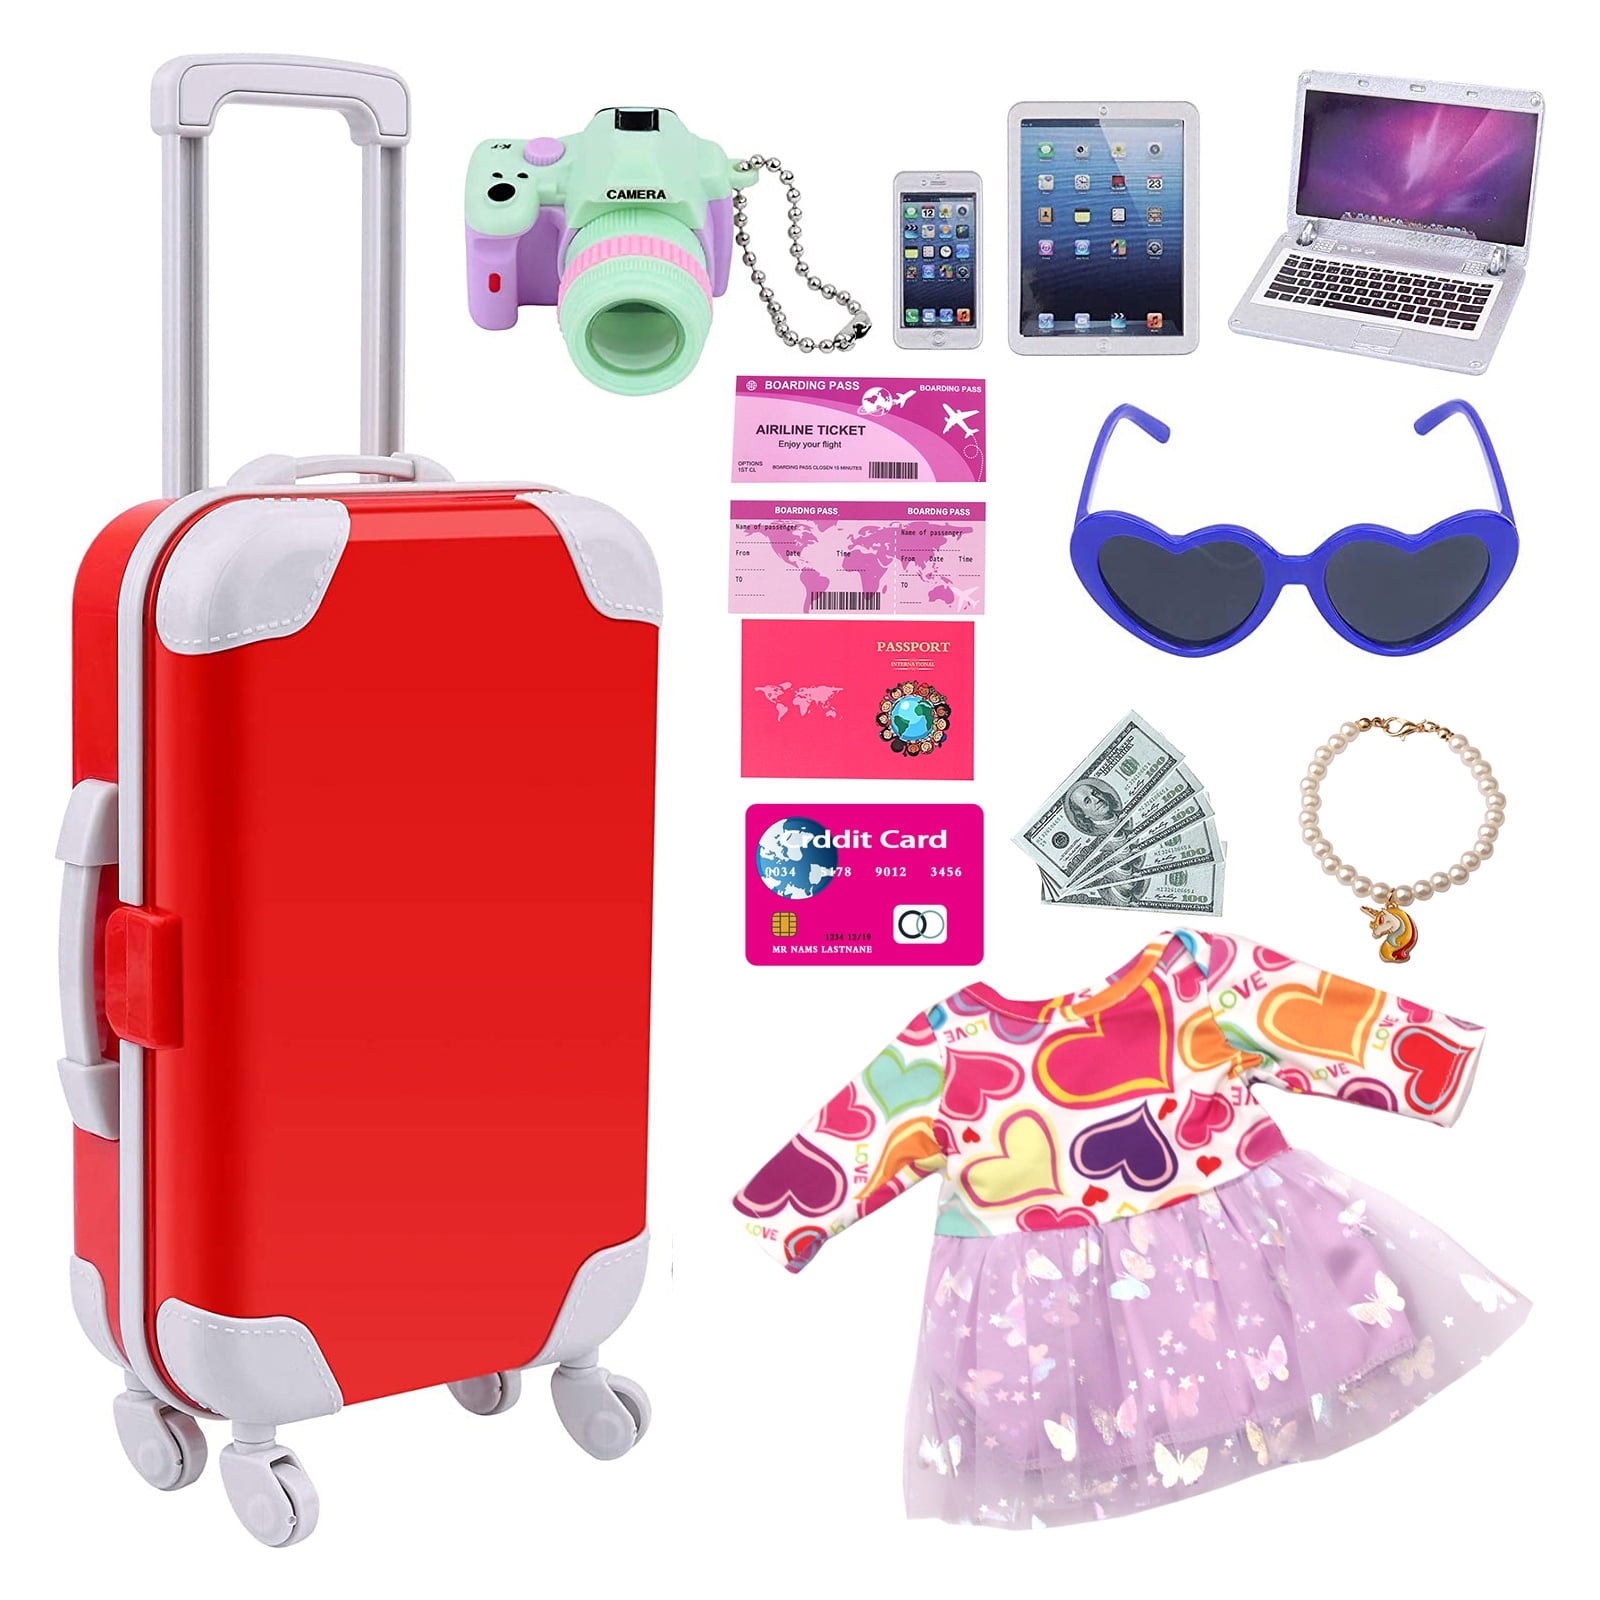 Cheap Travel Accessories That You Can Get At Walmart